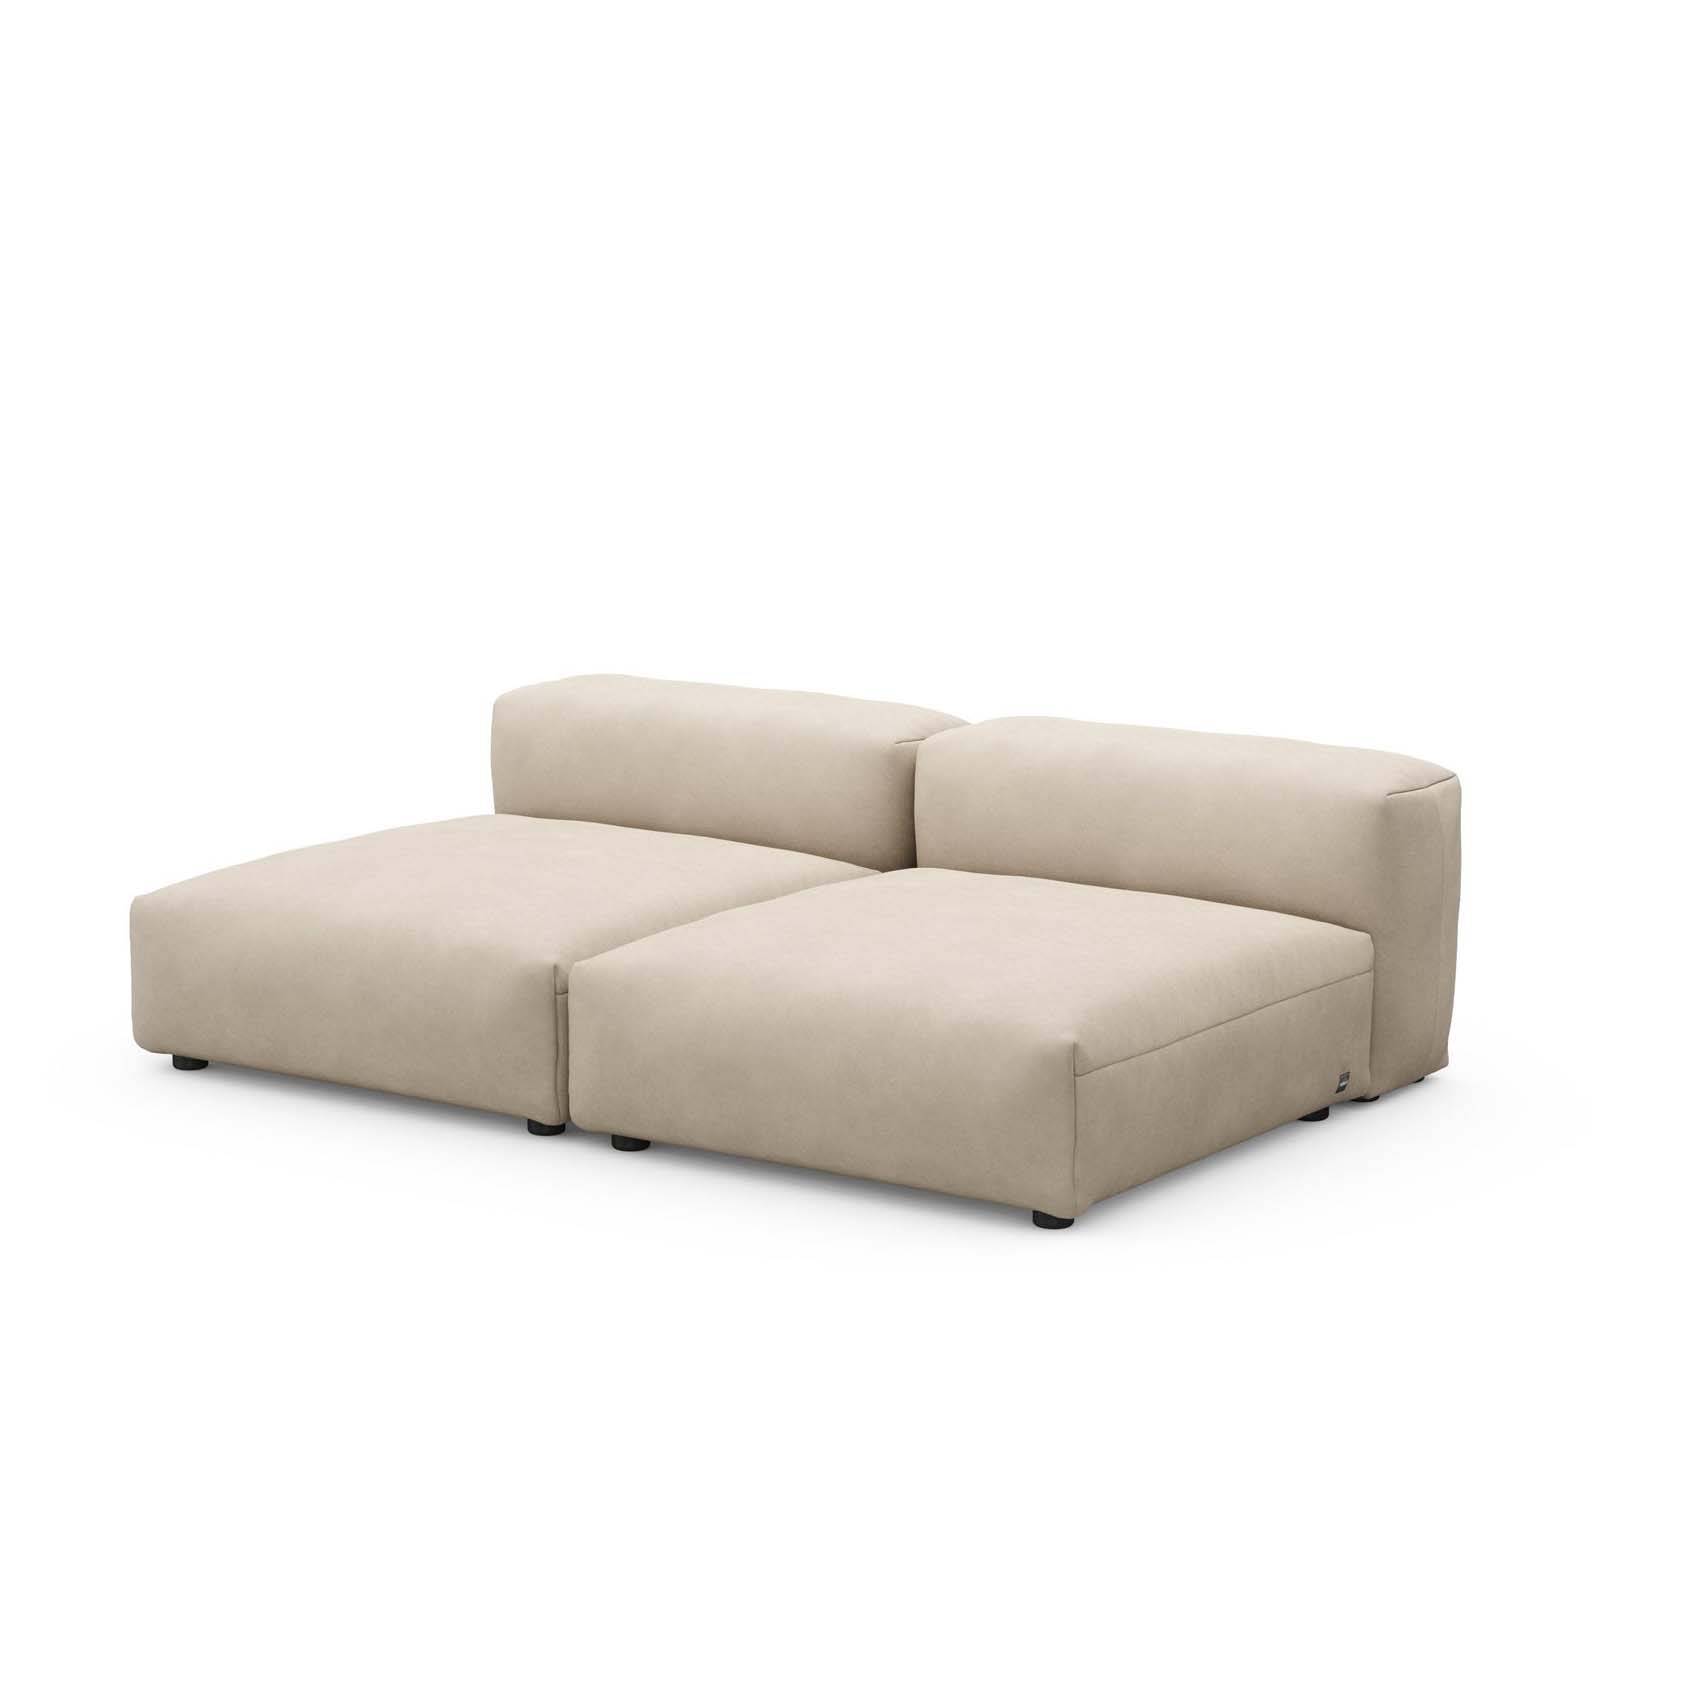 Two Seat Lounge Sofa L Canvas Beige